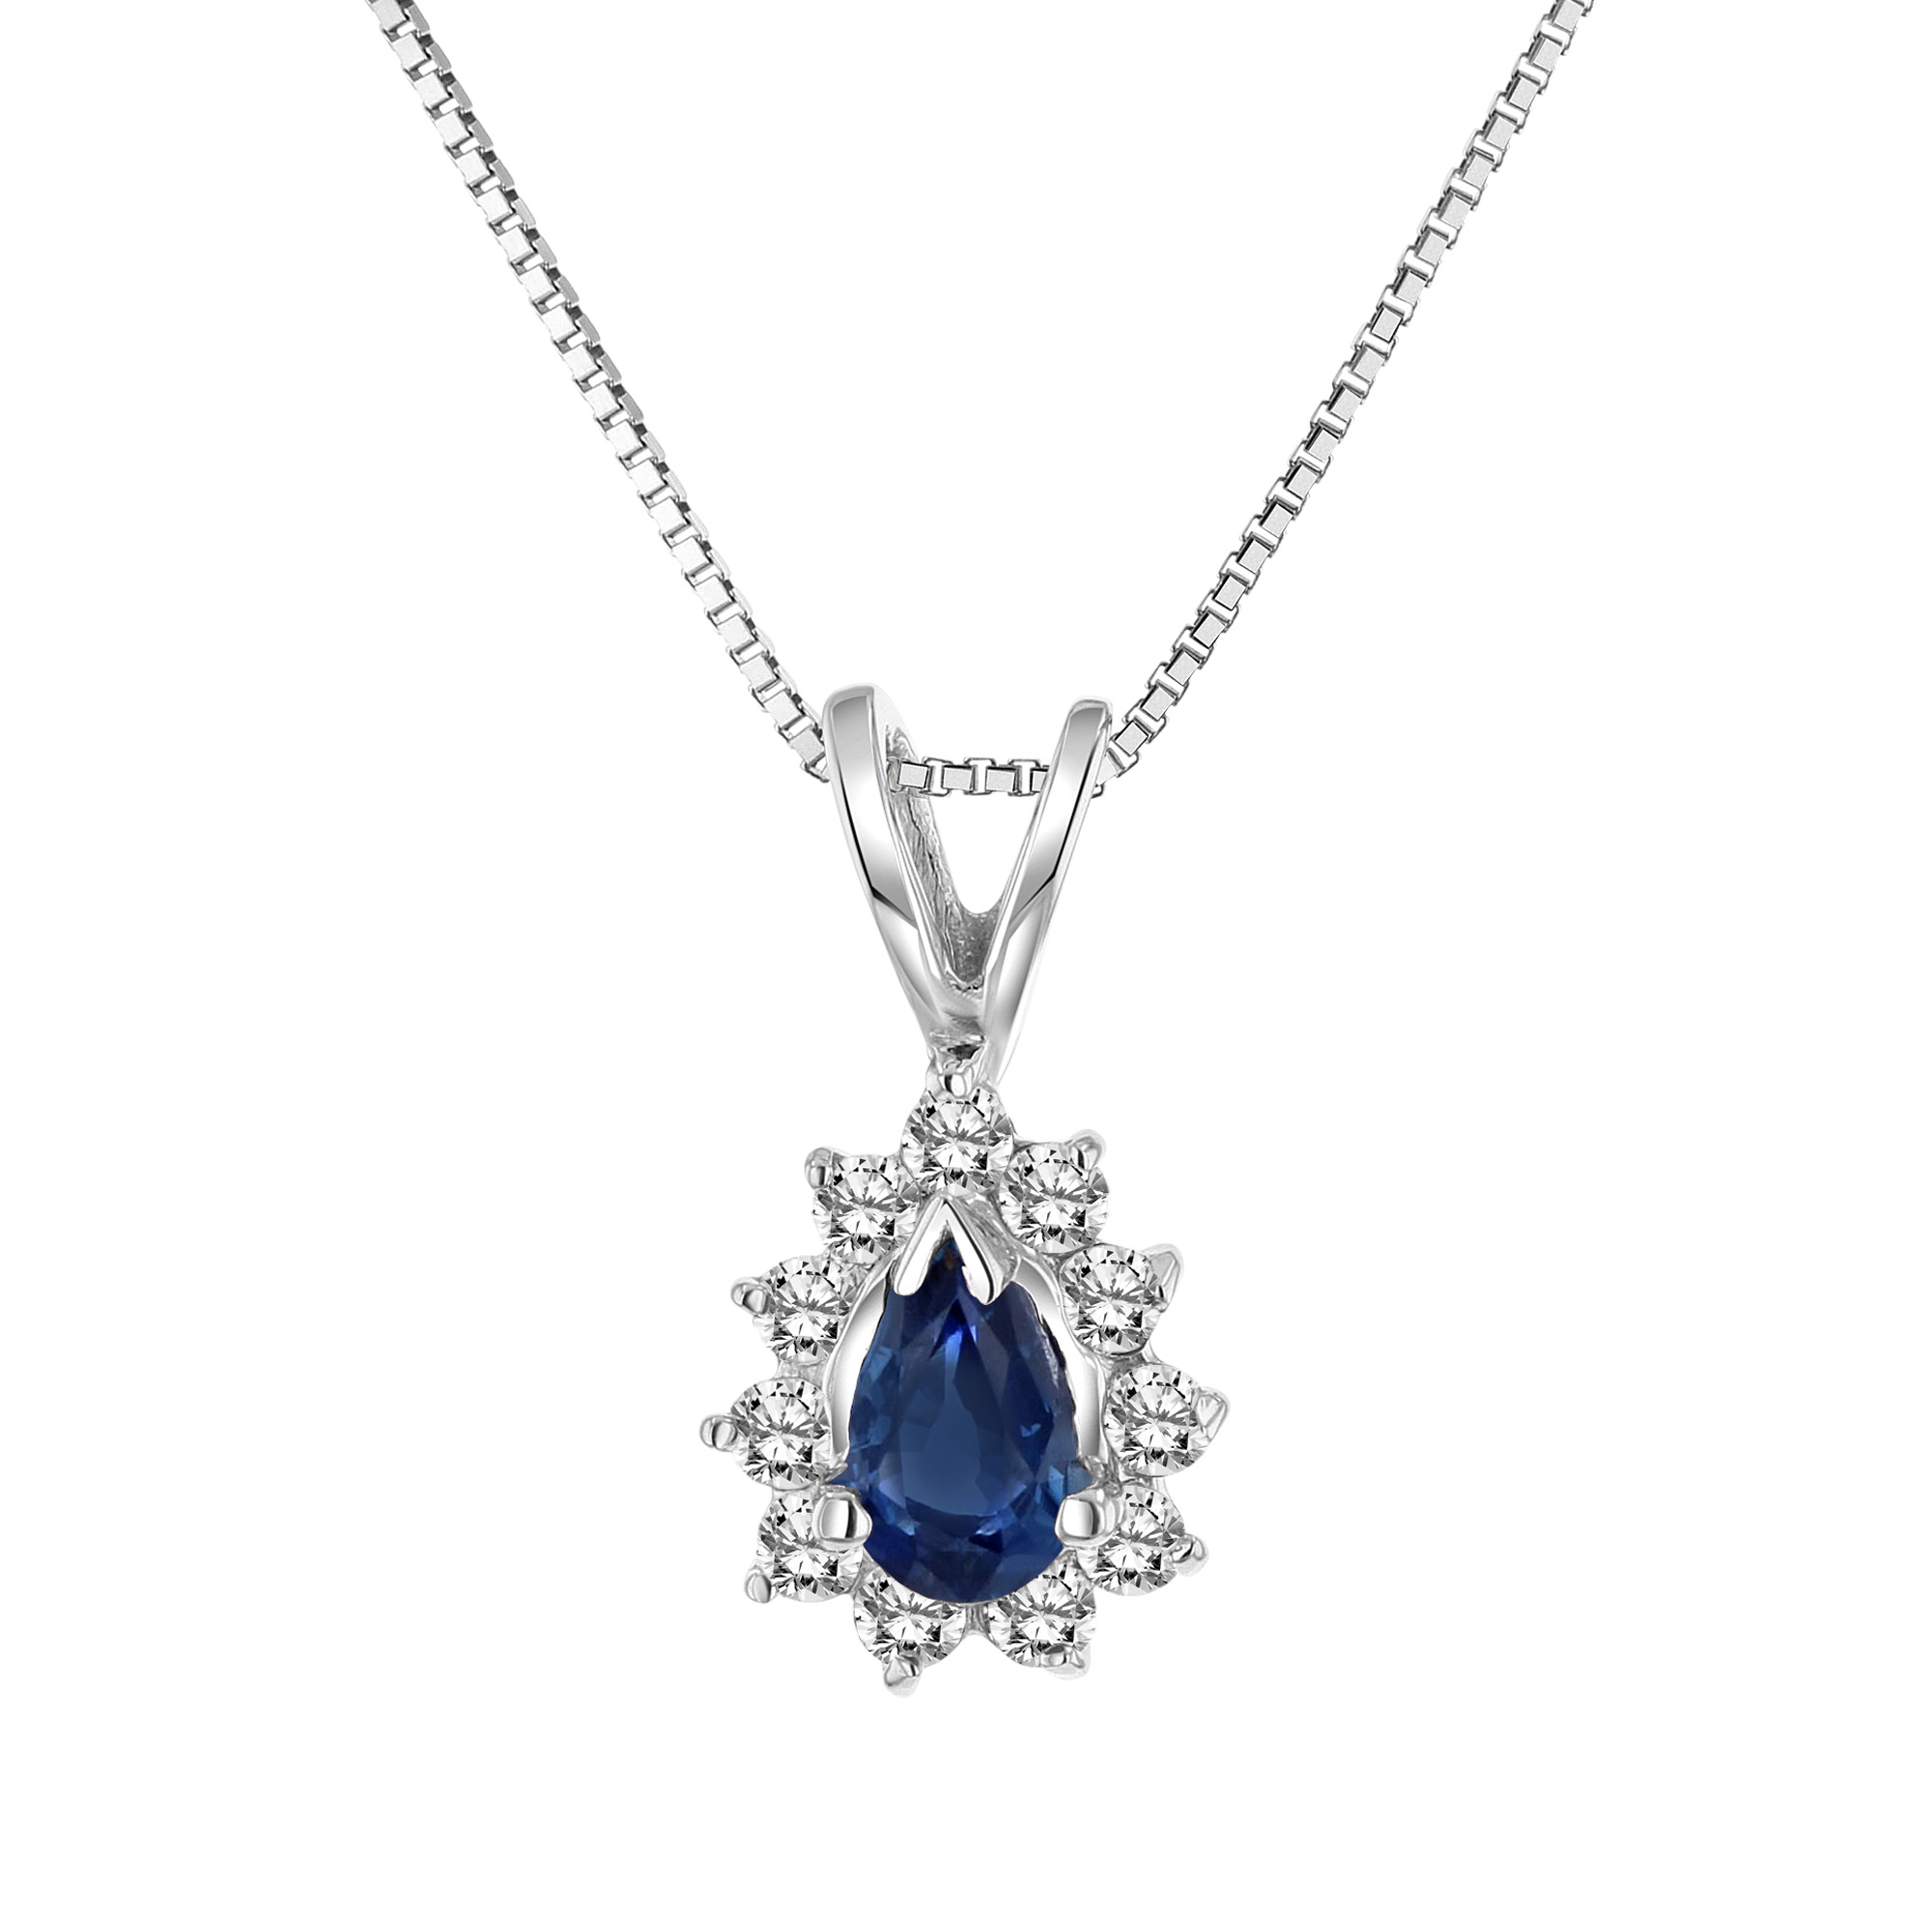 0.35cttw Diamond and Sapphire Pendant in 14k Gold